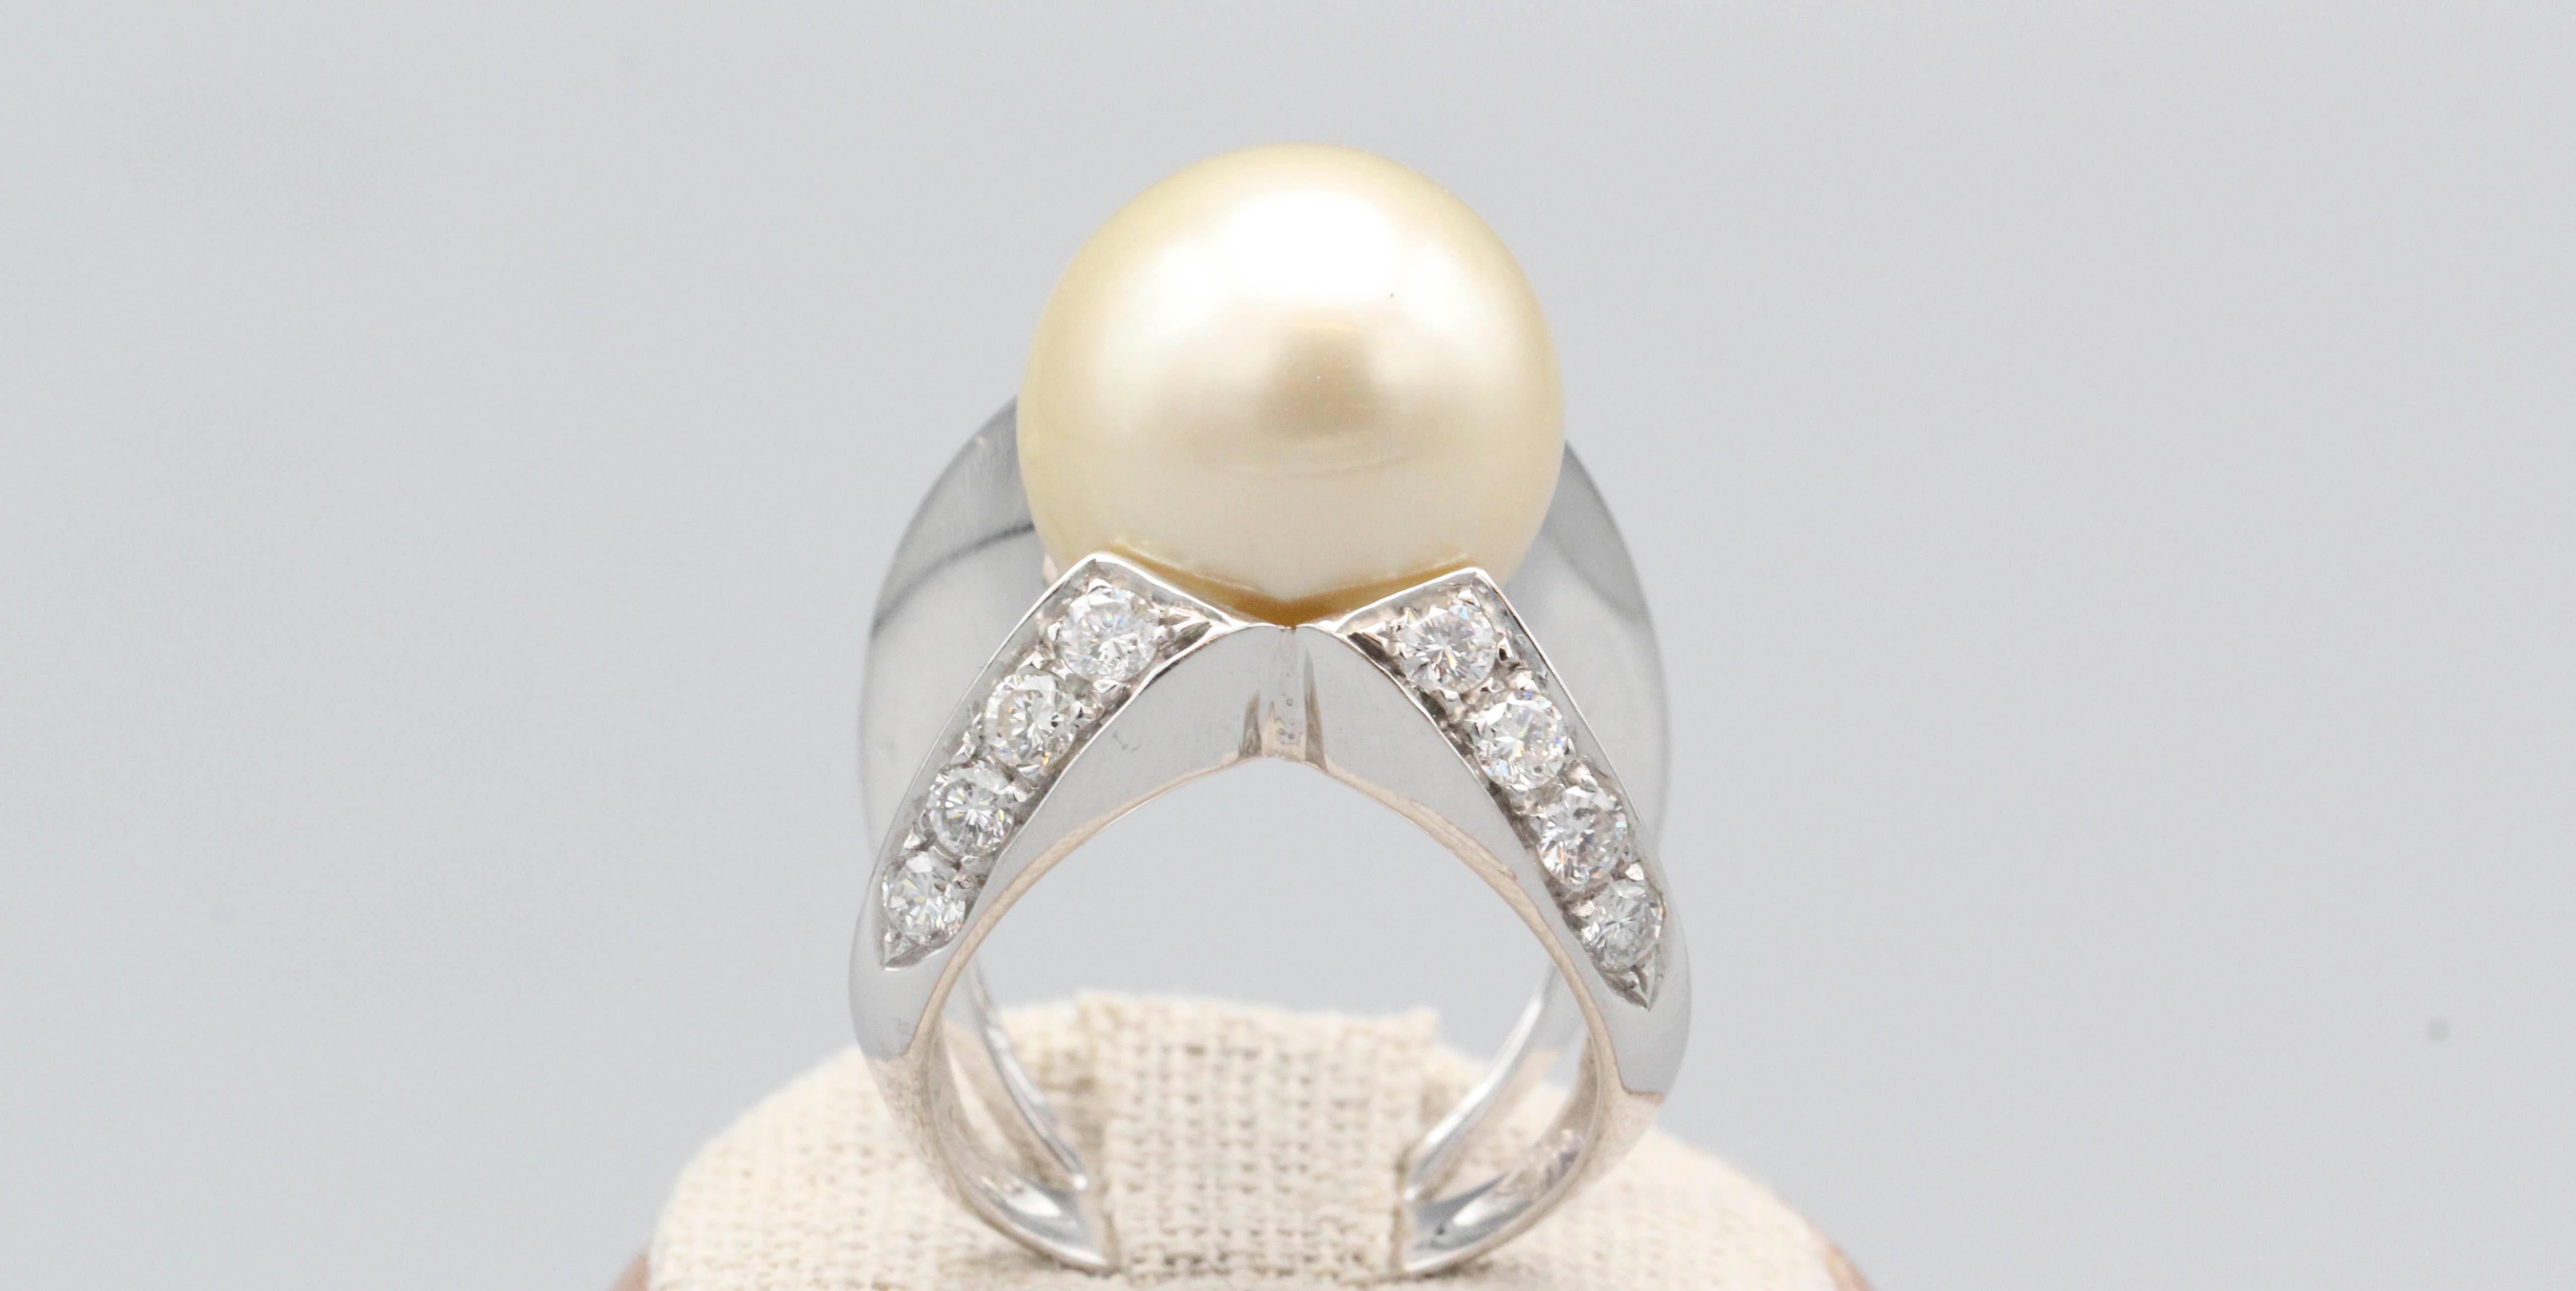 Fine cultured pearl and diamond ring set in 18k white gold, by Angela Pintaldi.  Featuring a 15 mm wide golden white South Sea pearl and approx. 1.5 carats of high grade white diamonds in an unusual octopus-like setting.  

Hallmarks: Angela